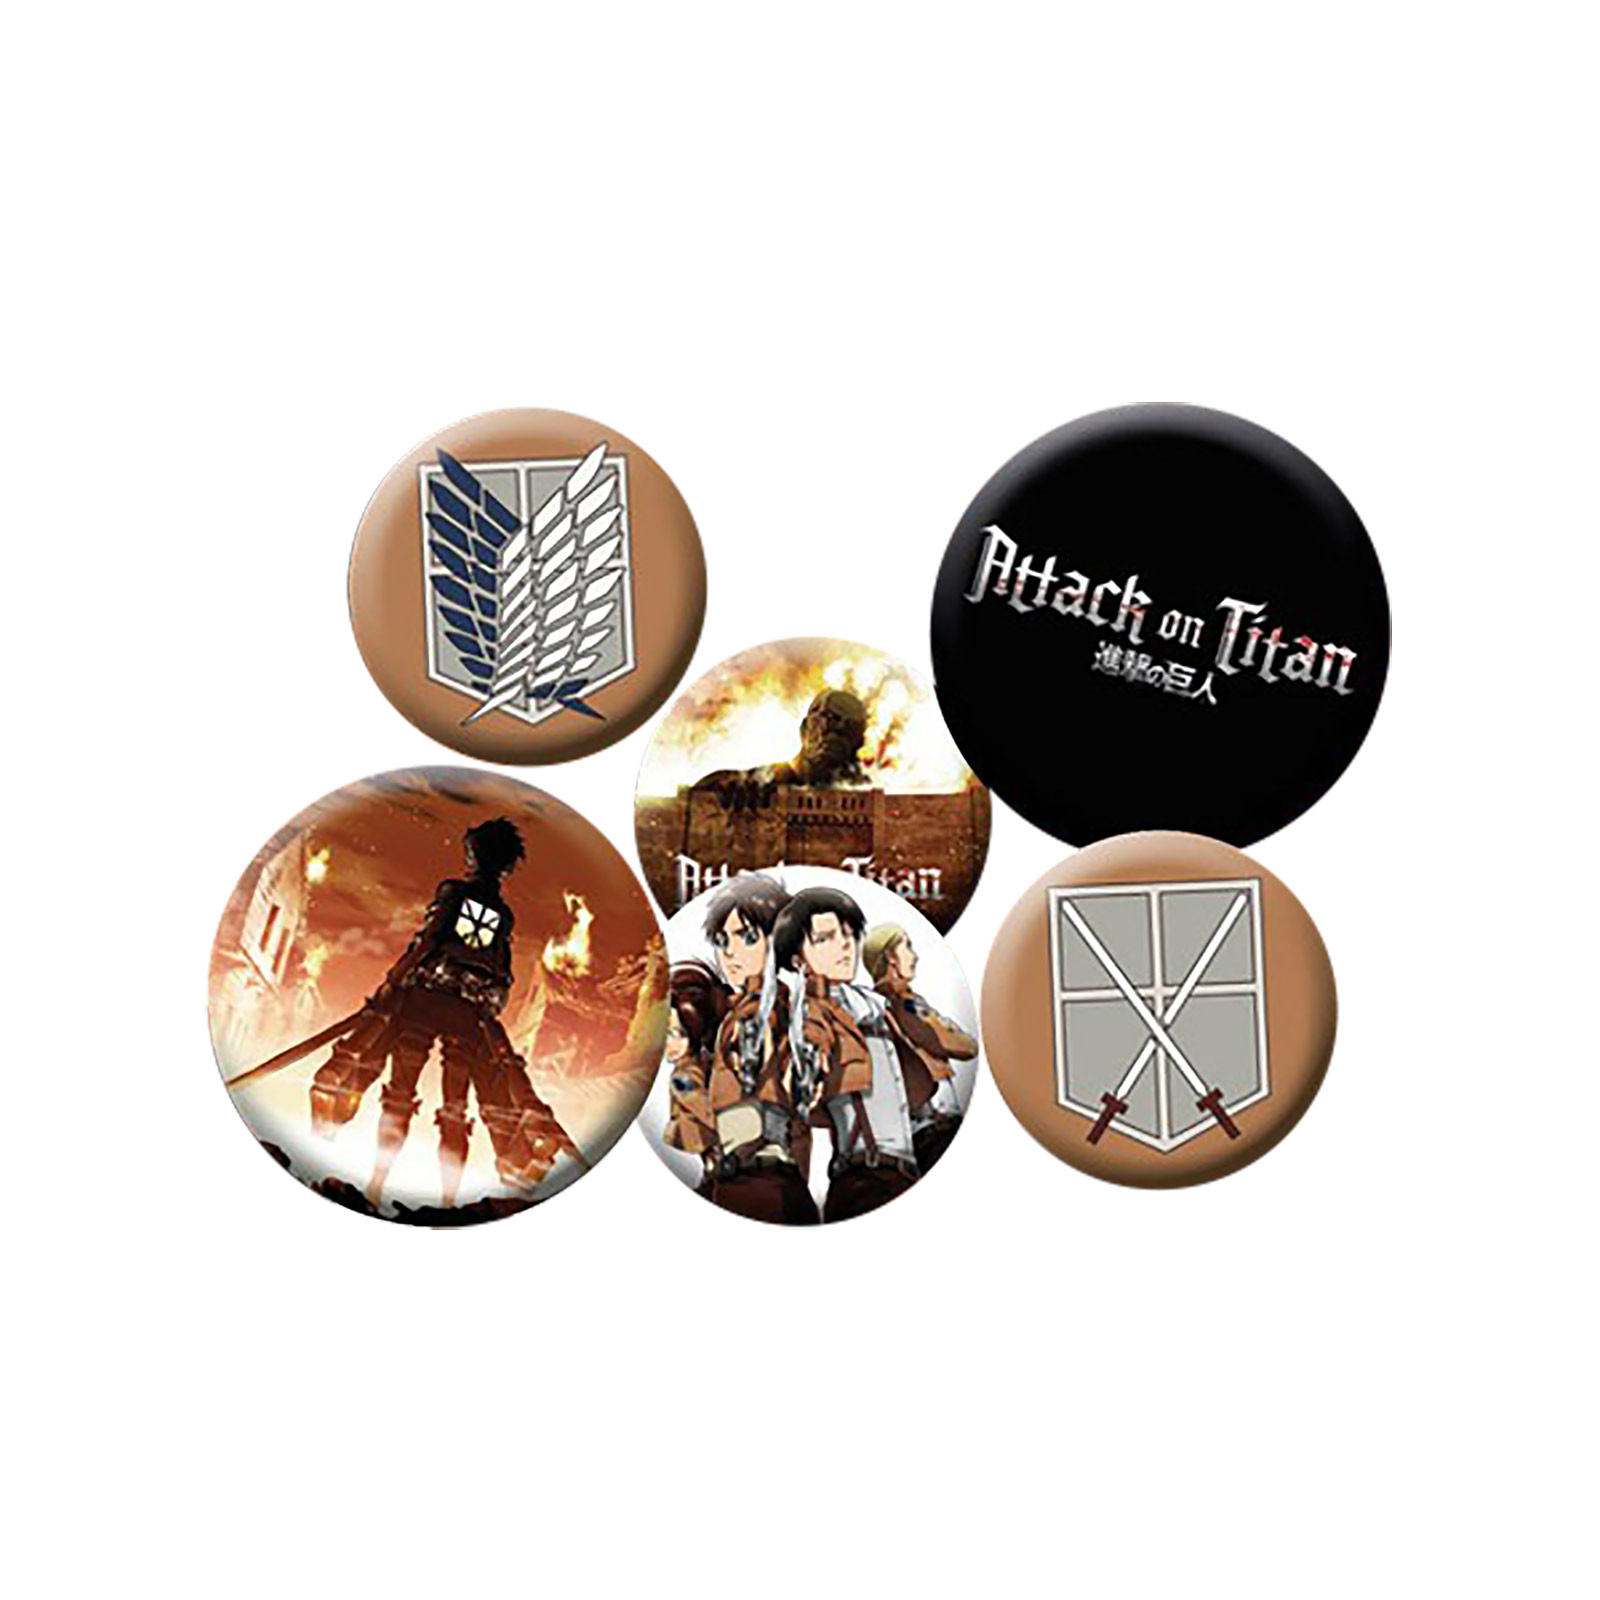 Attack on Titan - Character Button 6er Set